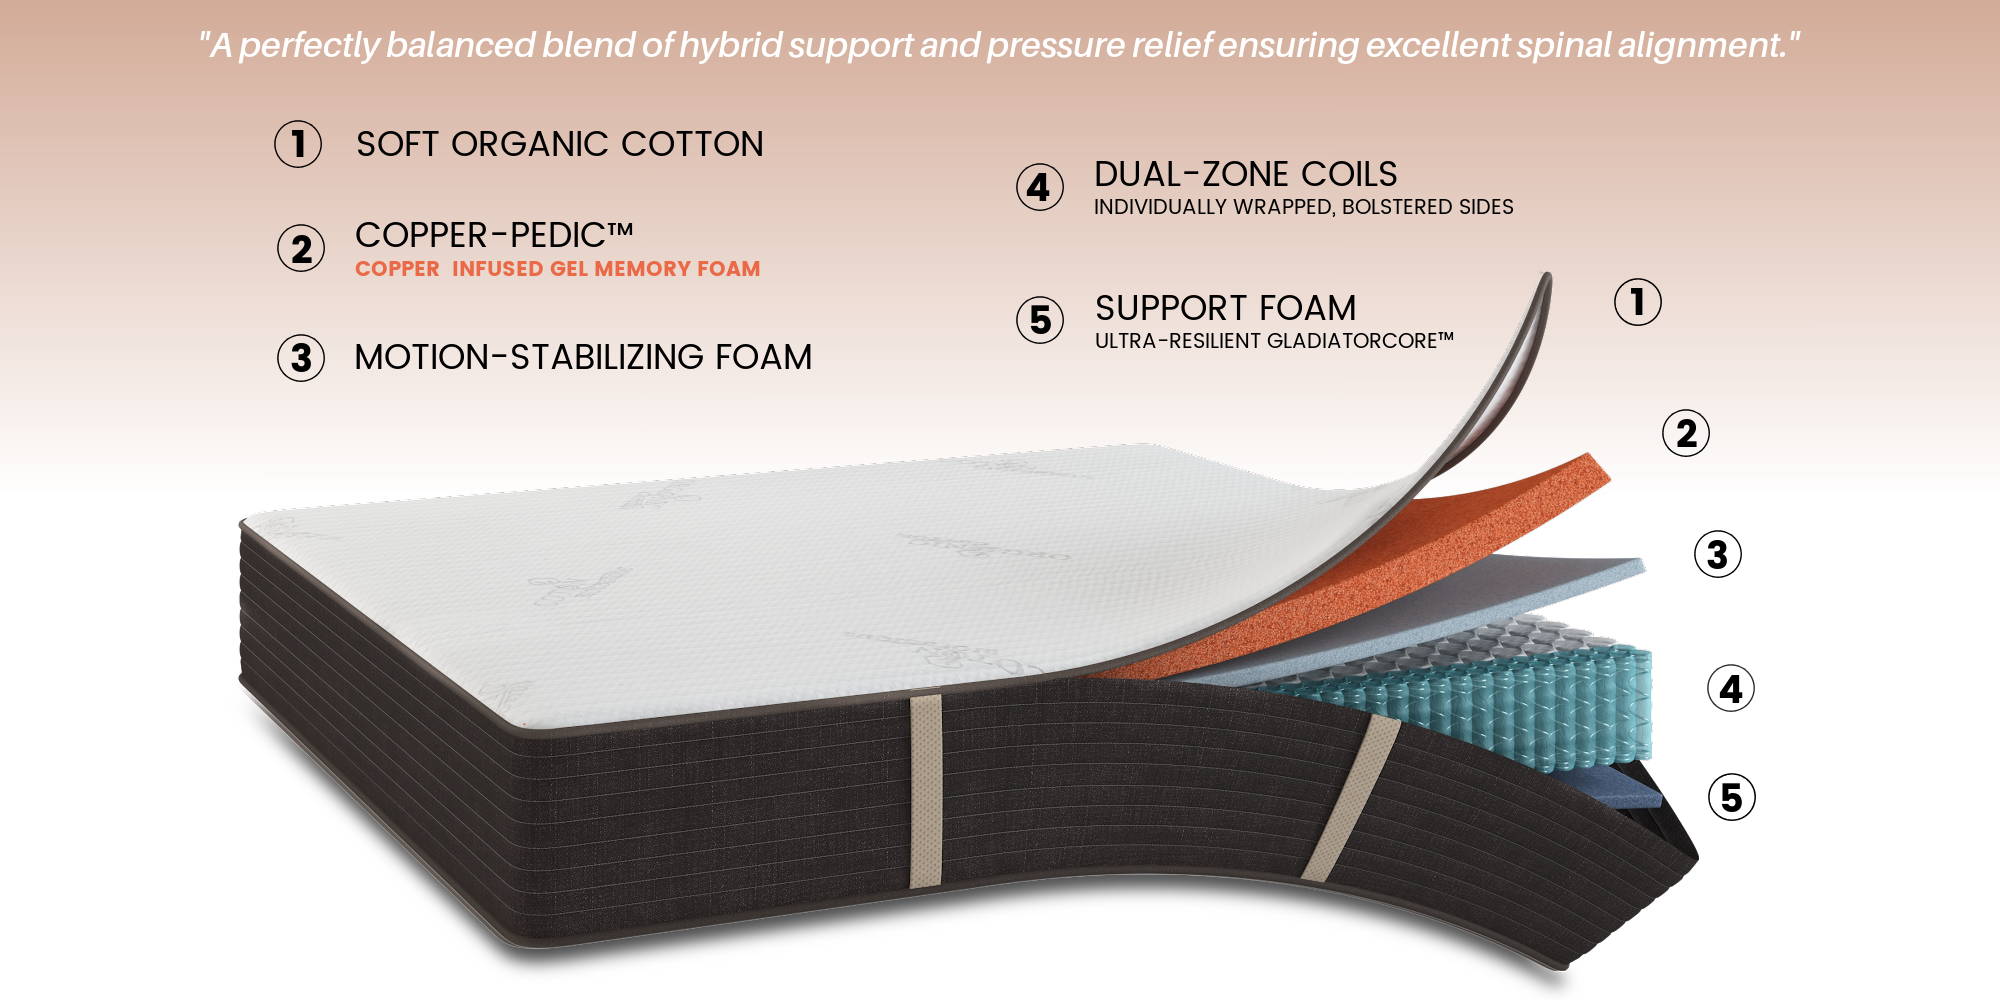 Open mattress with layers showing: soft organic cotton fabric, copper-infused cooling memory foam, motion stabilizing foam, dual-zone coils with bolstered sides, support foam made from plant-based GladiatorCore foam.